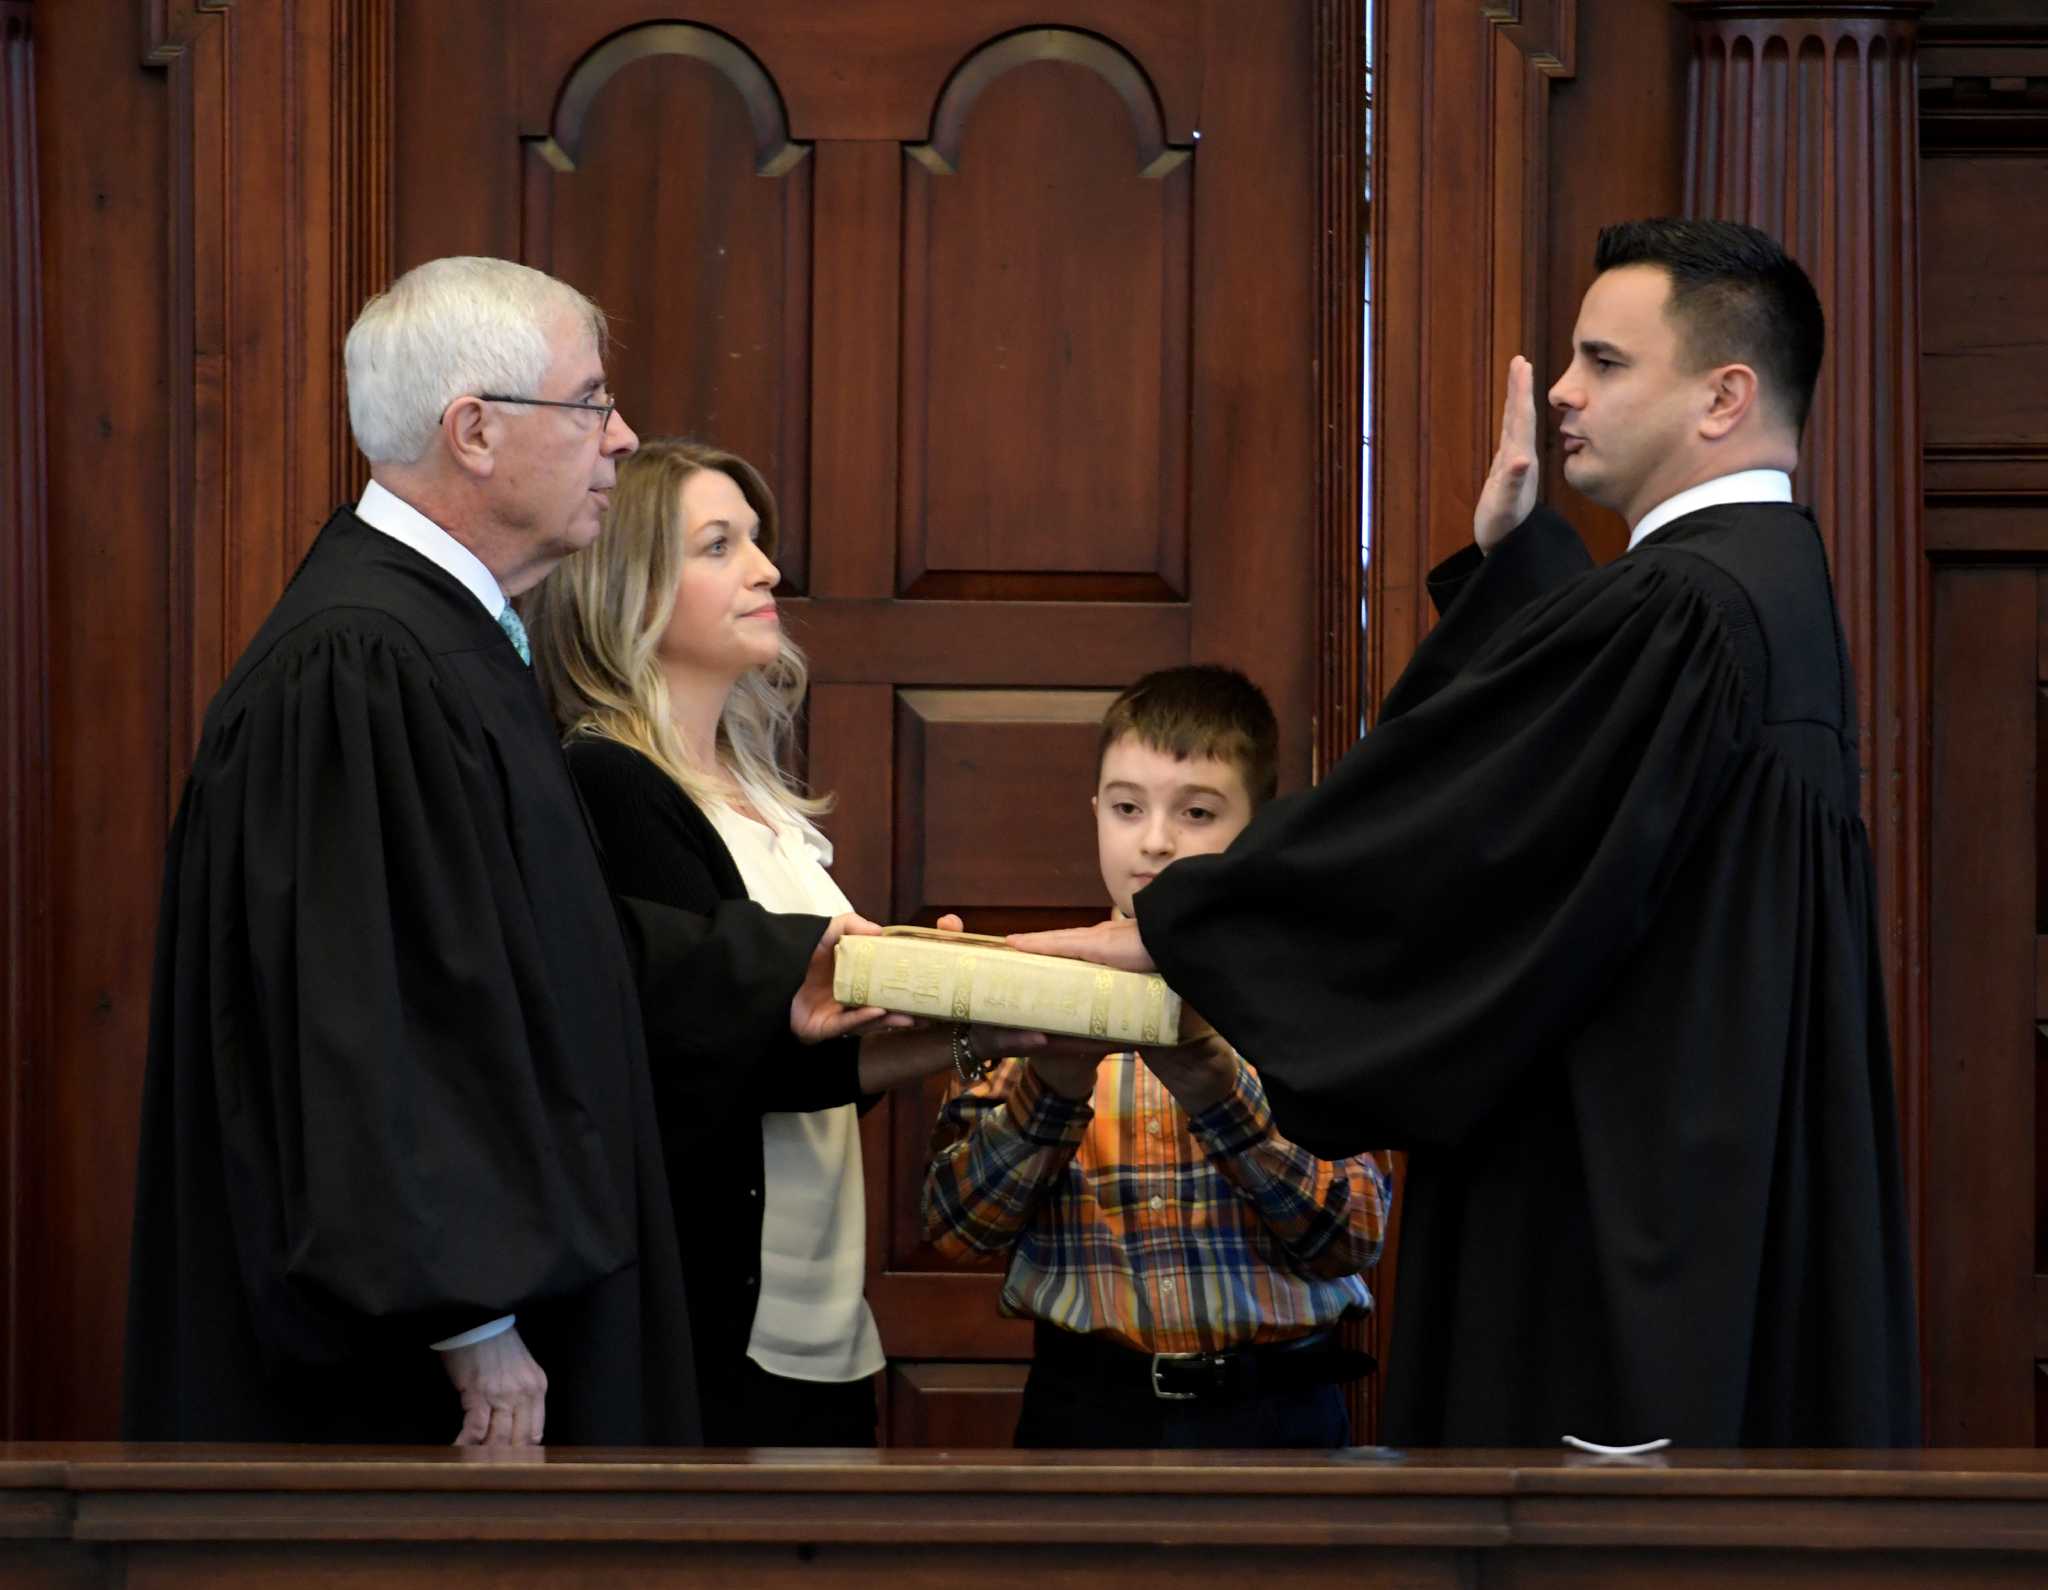 Rensselaer County Judge Patrick McGrath is leaving the bench after 37 years